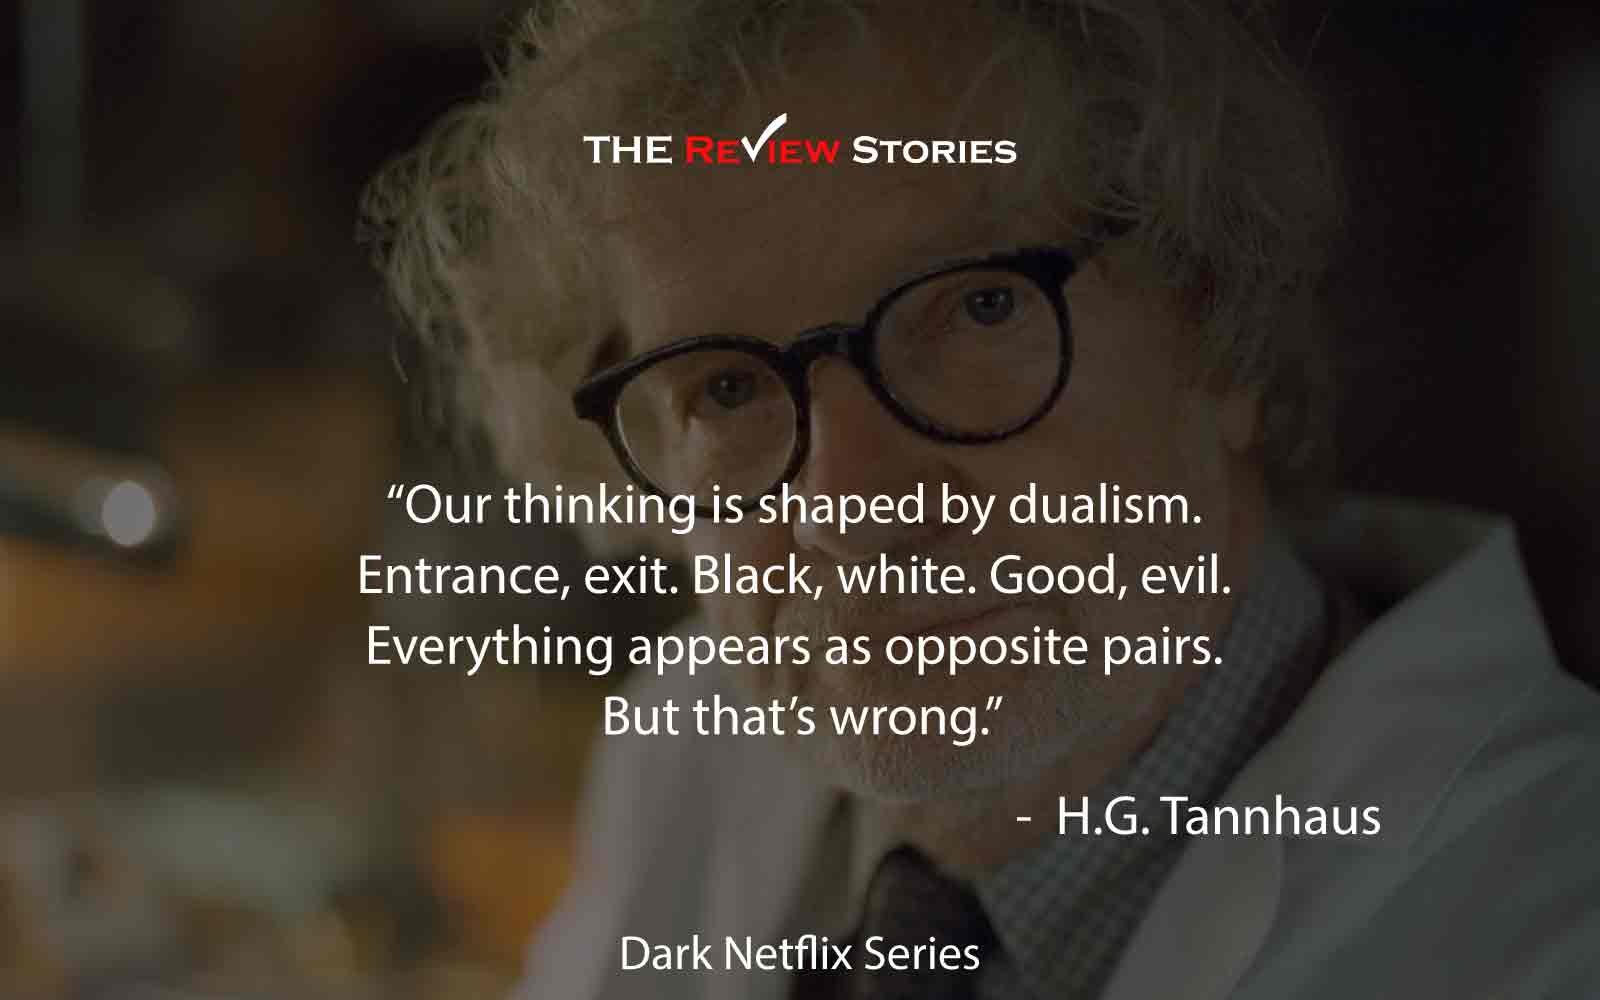 Our thinking is shaped by dualism. Entrance, exit. Black, white. Good, evil. Everything appears as opposite pairs. But that’s wrong